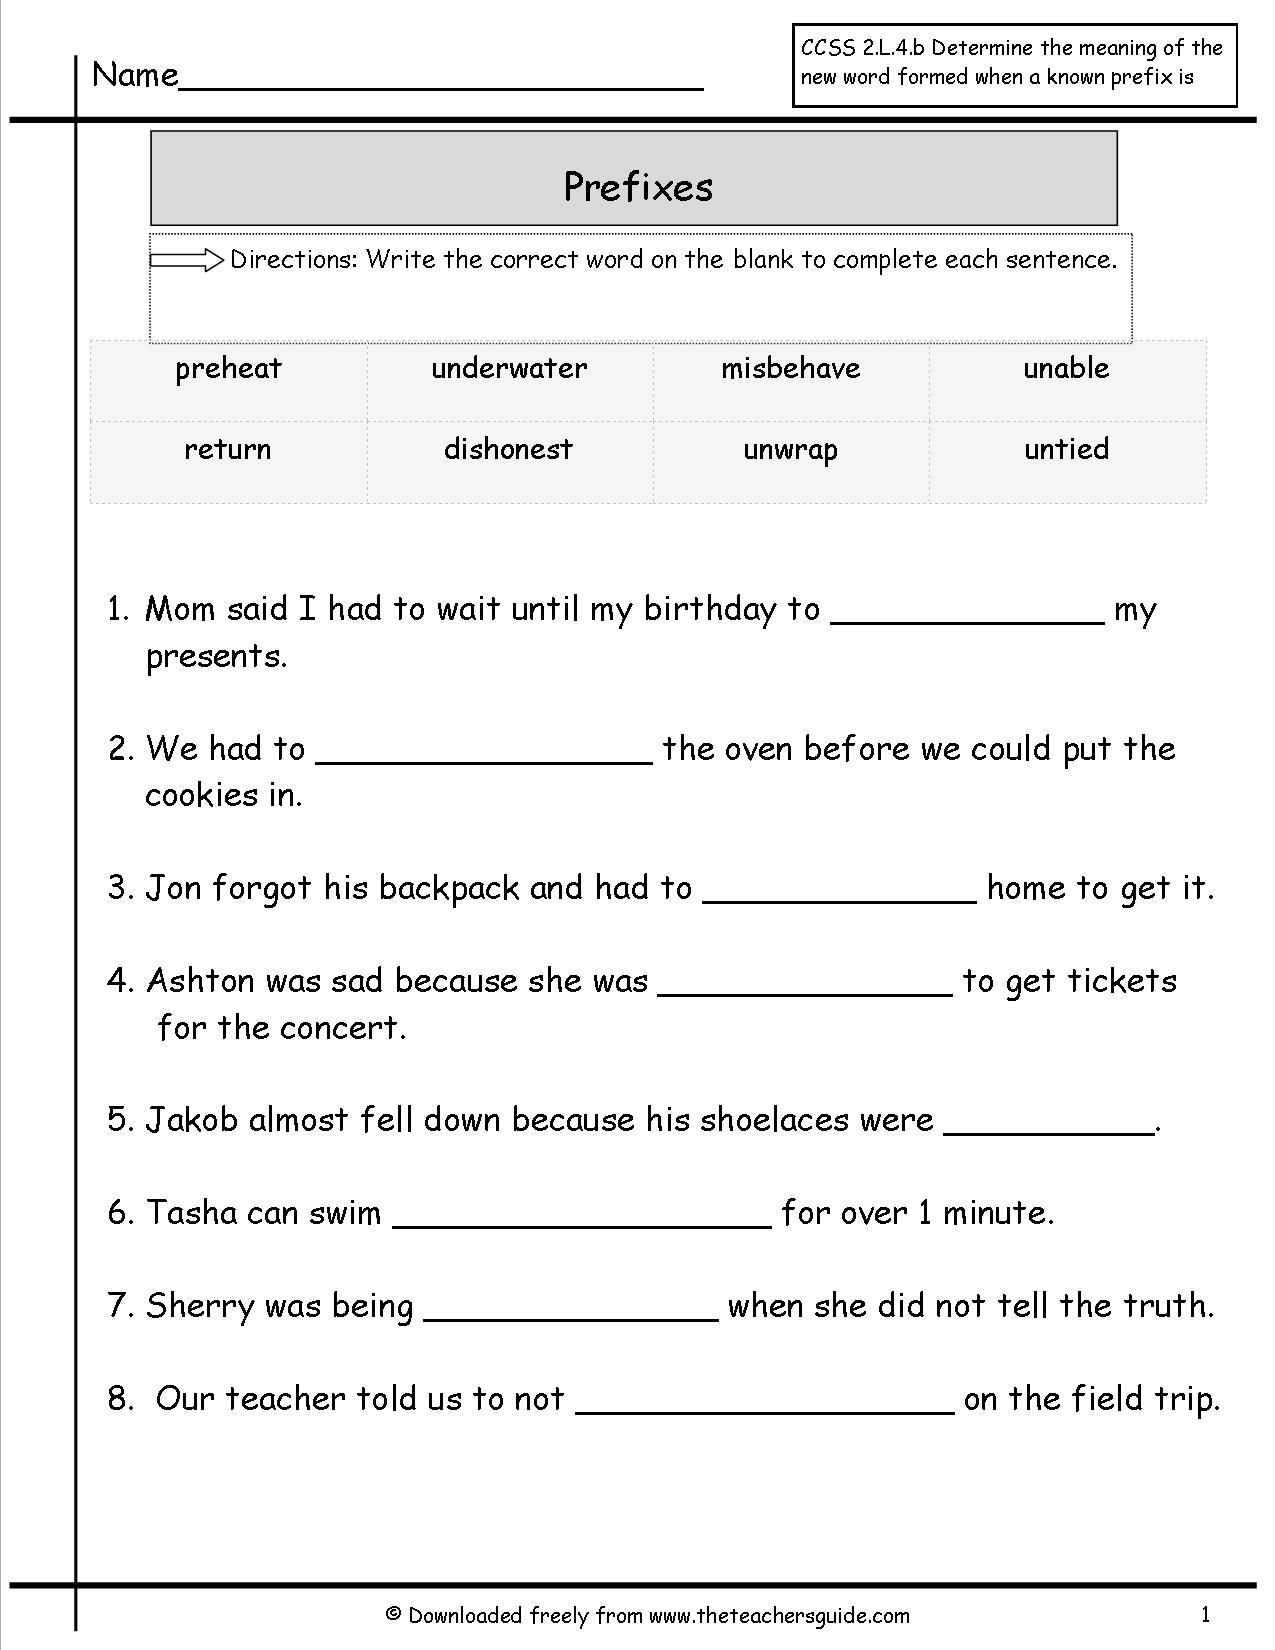 Suffix Worksheets for 4th Grade Prefixes and Suffixes Worksheets Look at This One Next Week